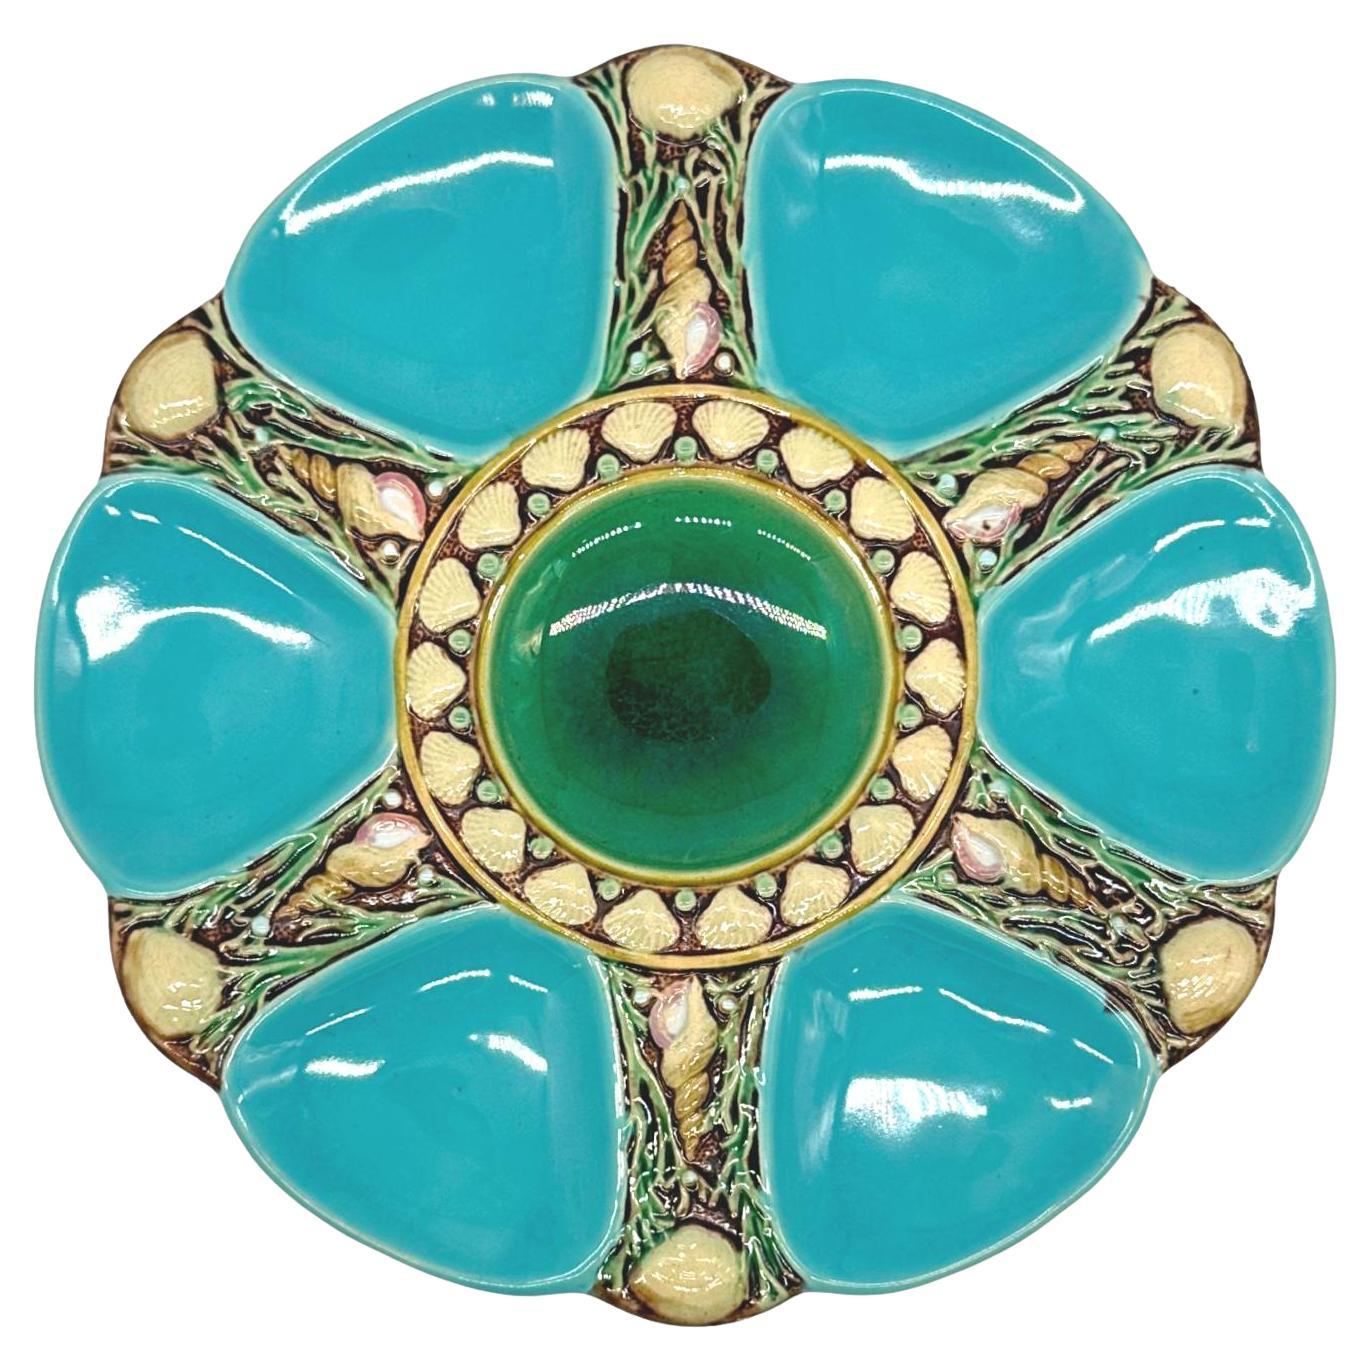 Minton Majolica Turquoise-Ground Oyster Plate, Shells and Seaweed, Dated 1878